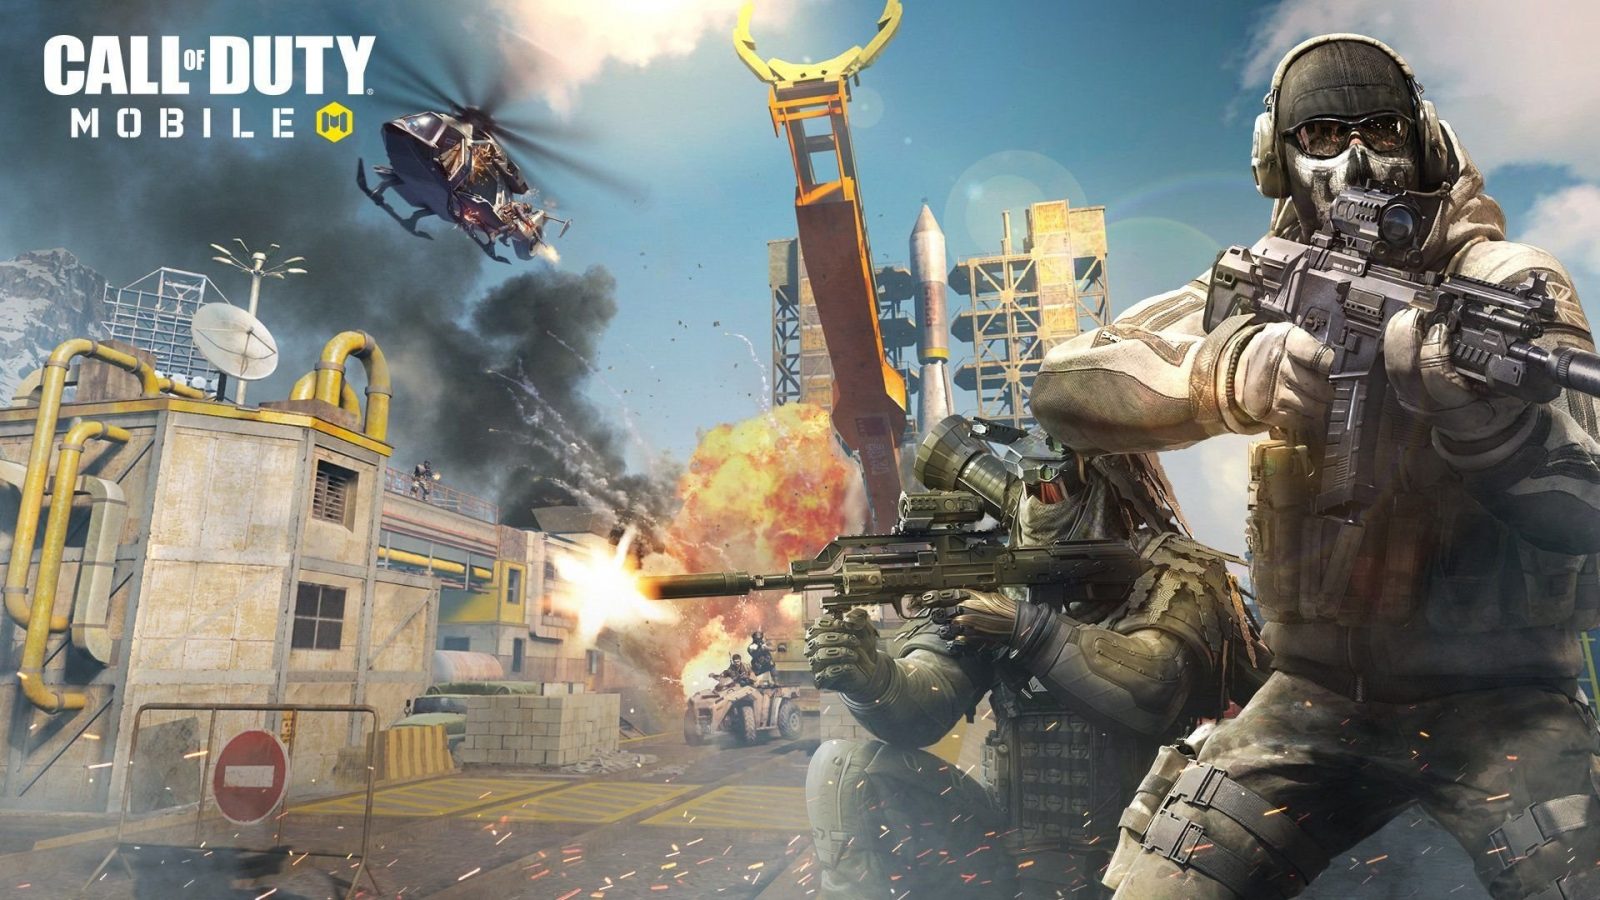 Beware of Call of Duty Mobile APK Downloads! Rampant Scams ... - 